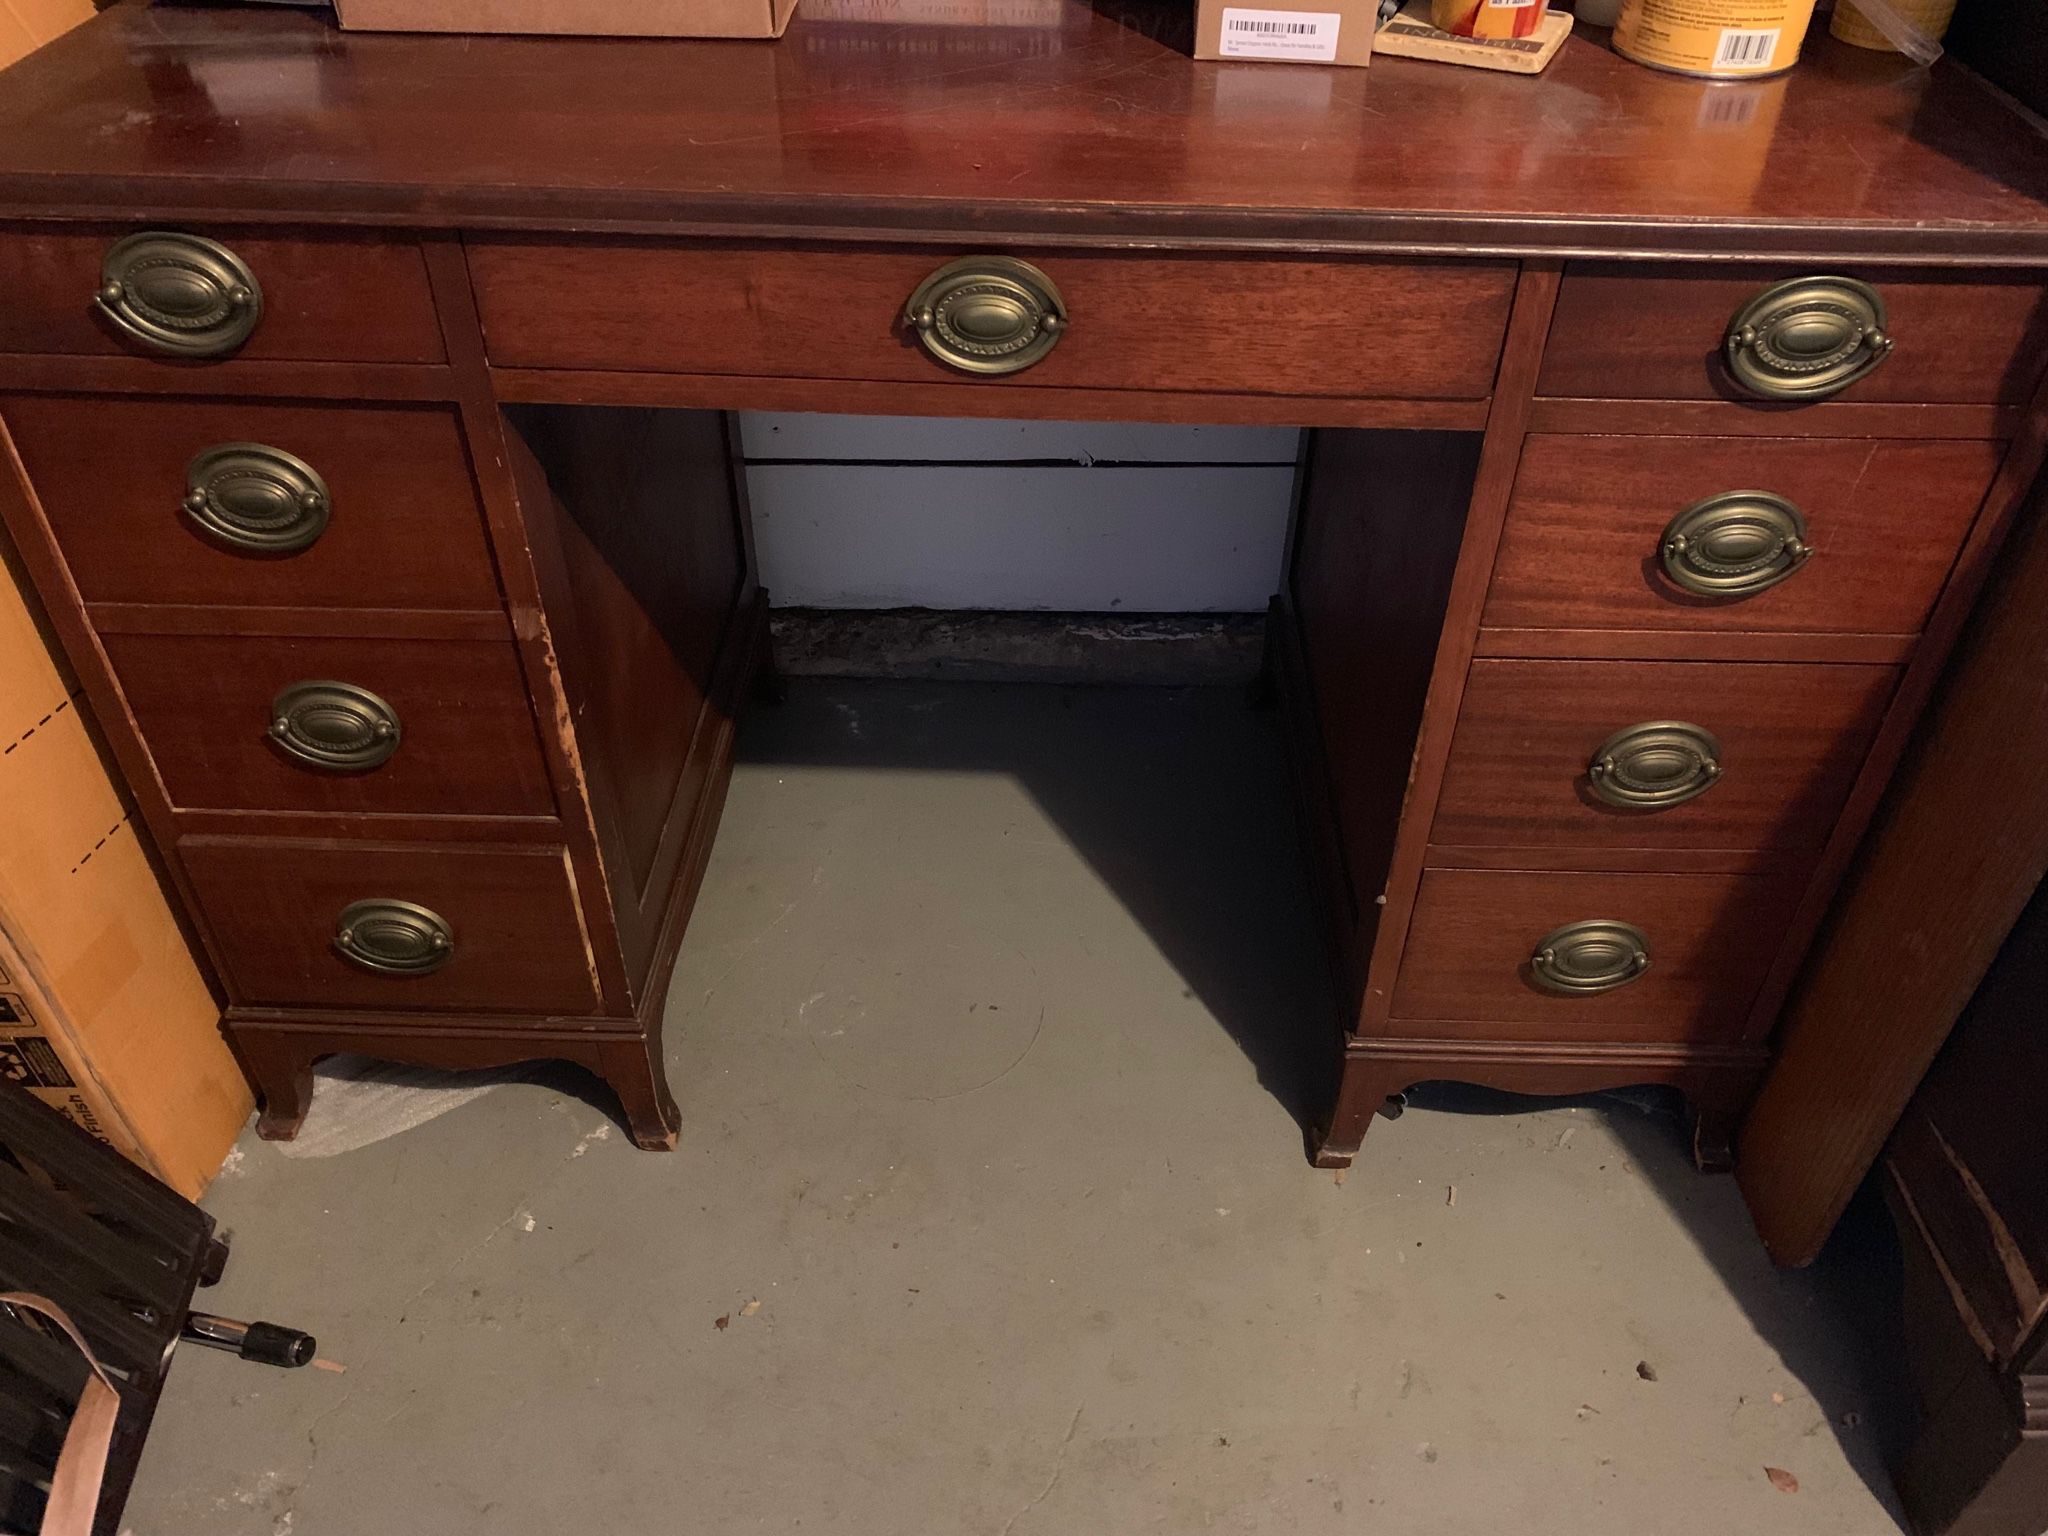 Mahogany antique desk or Vanity With drawers